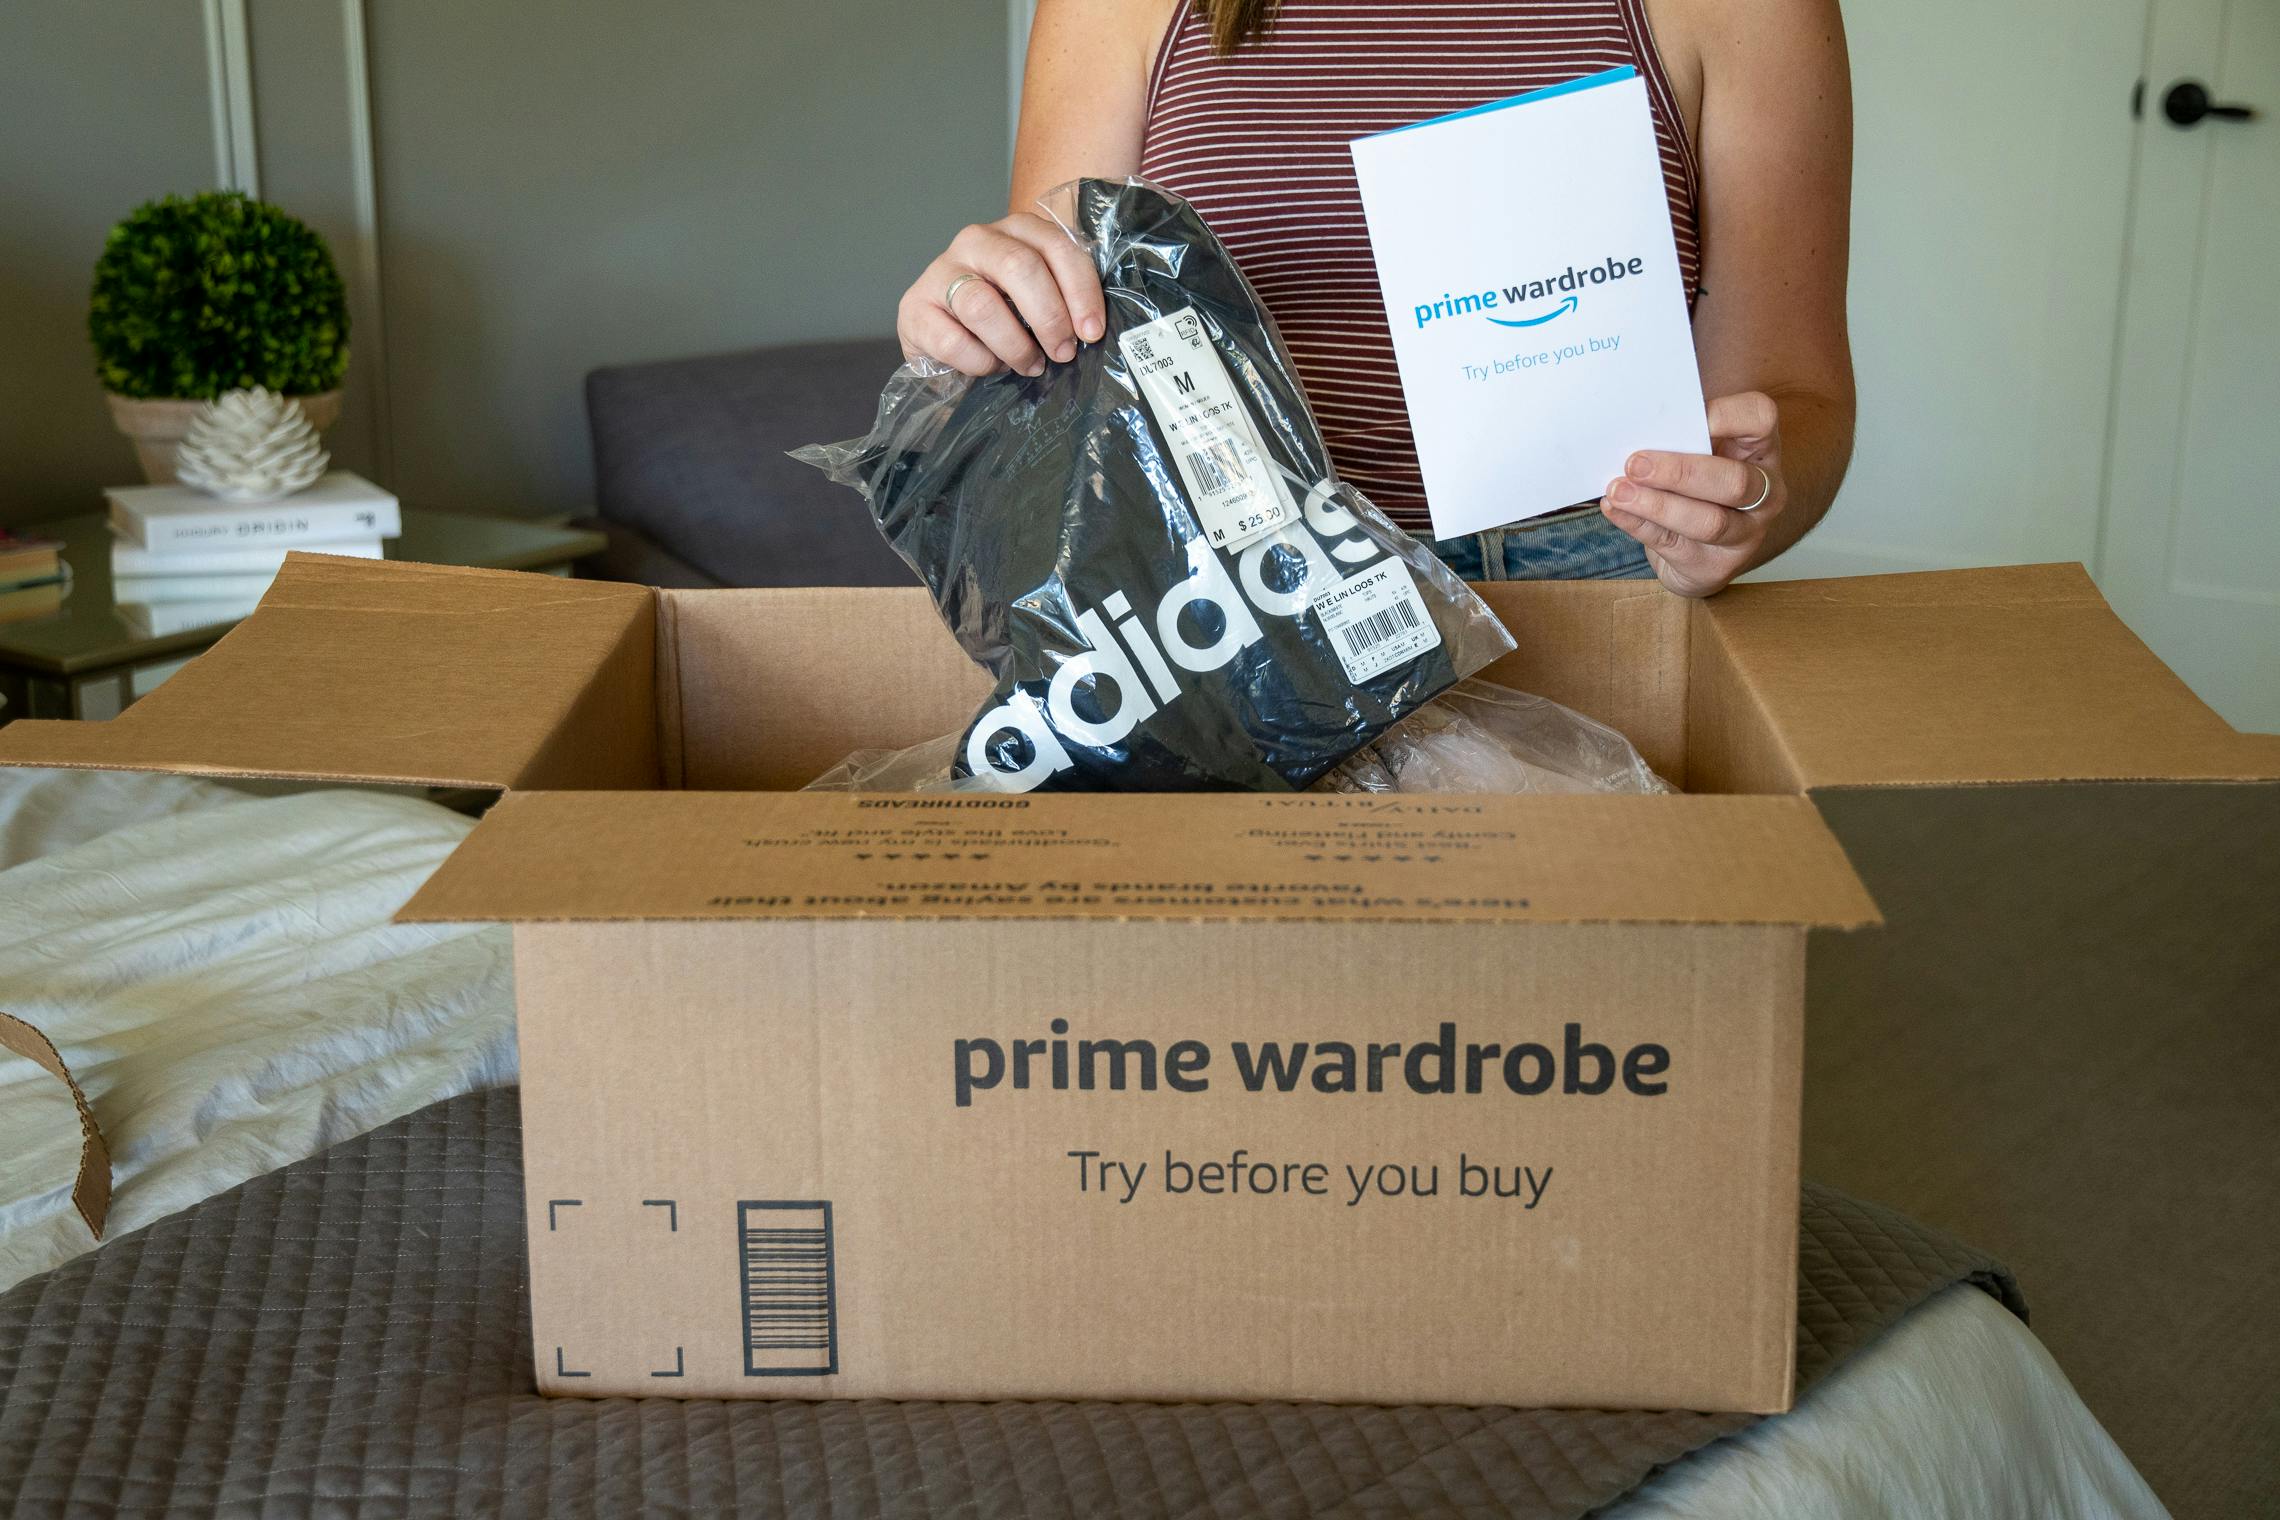 I Tried Amazon Prime Wardrobe And Here S My Honest Review The Krazy Coupon Lady